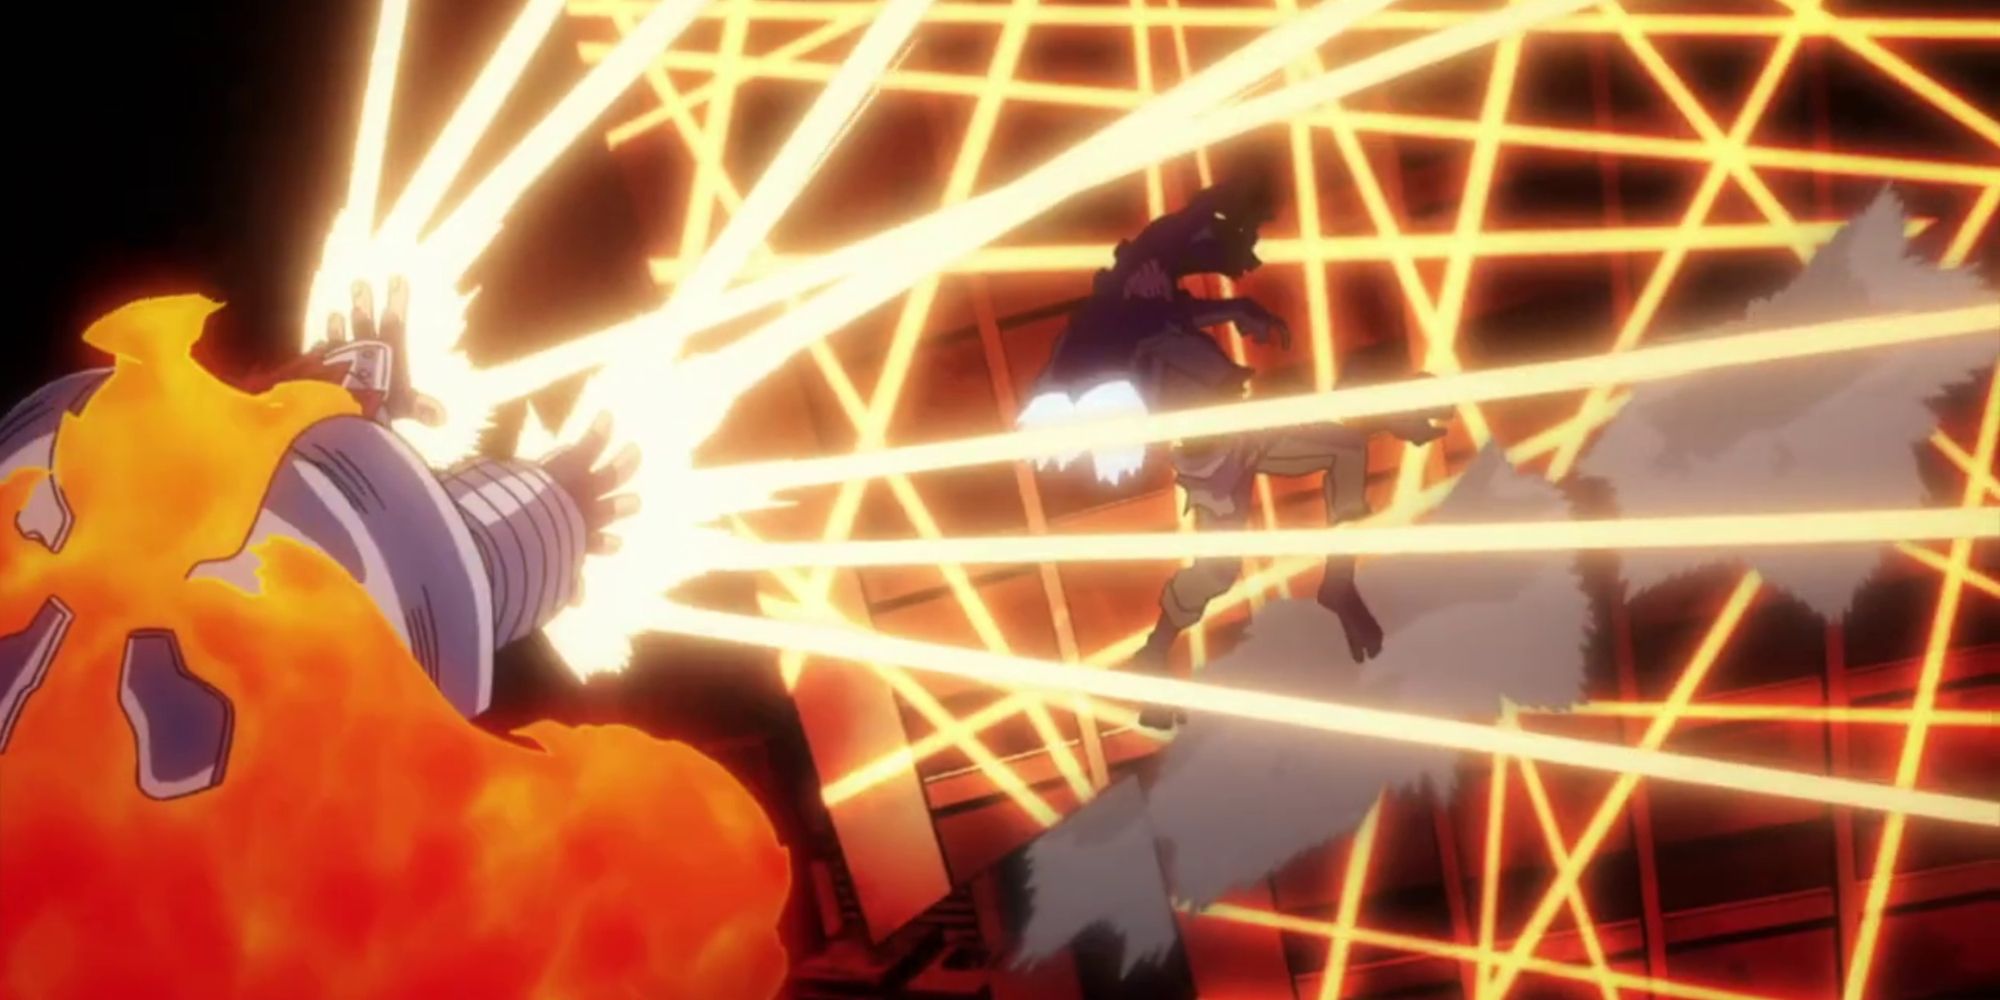 endeavor's hell spider attack